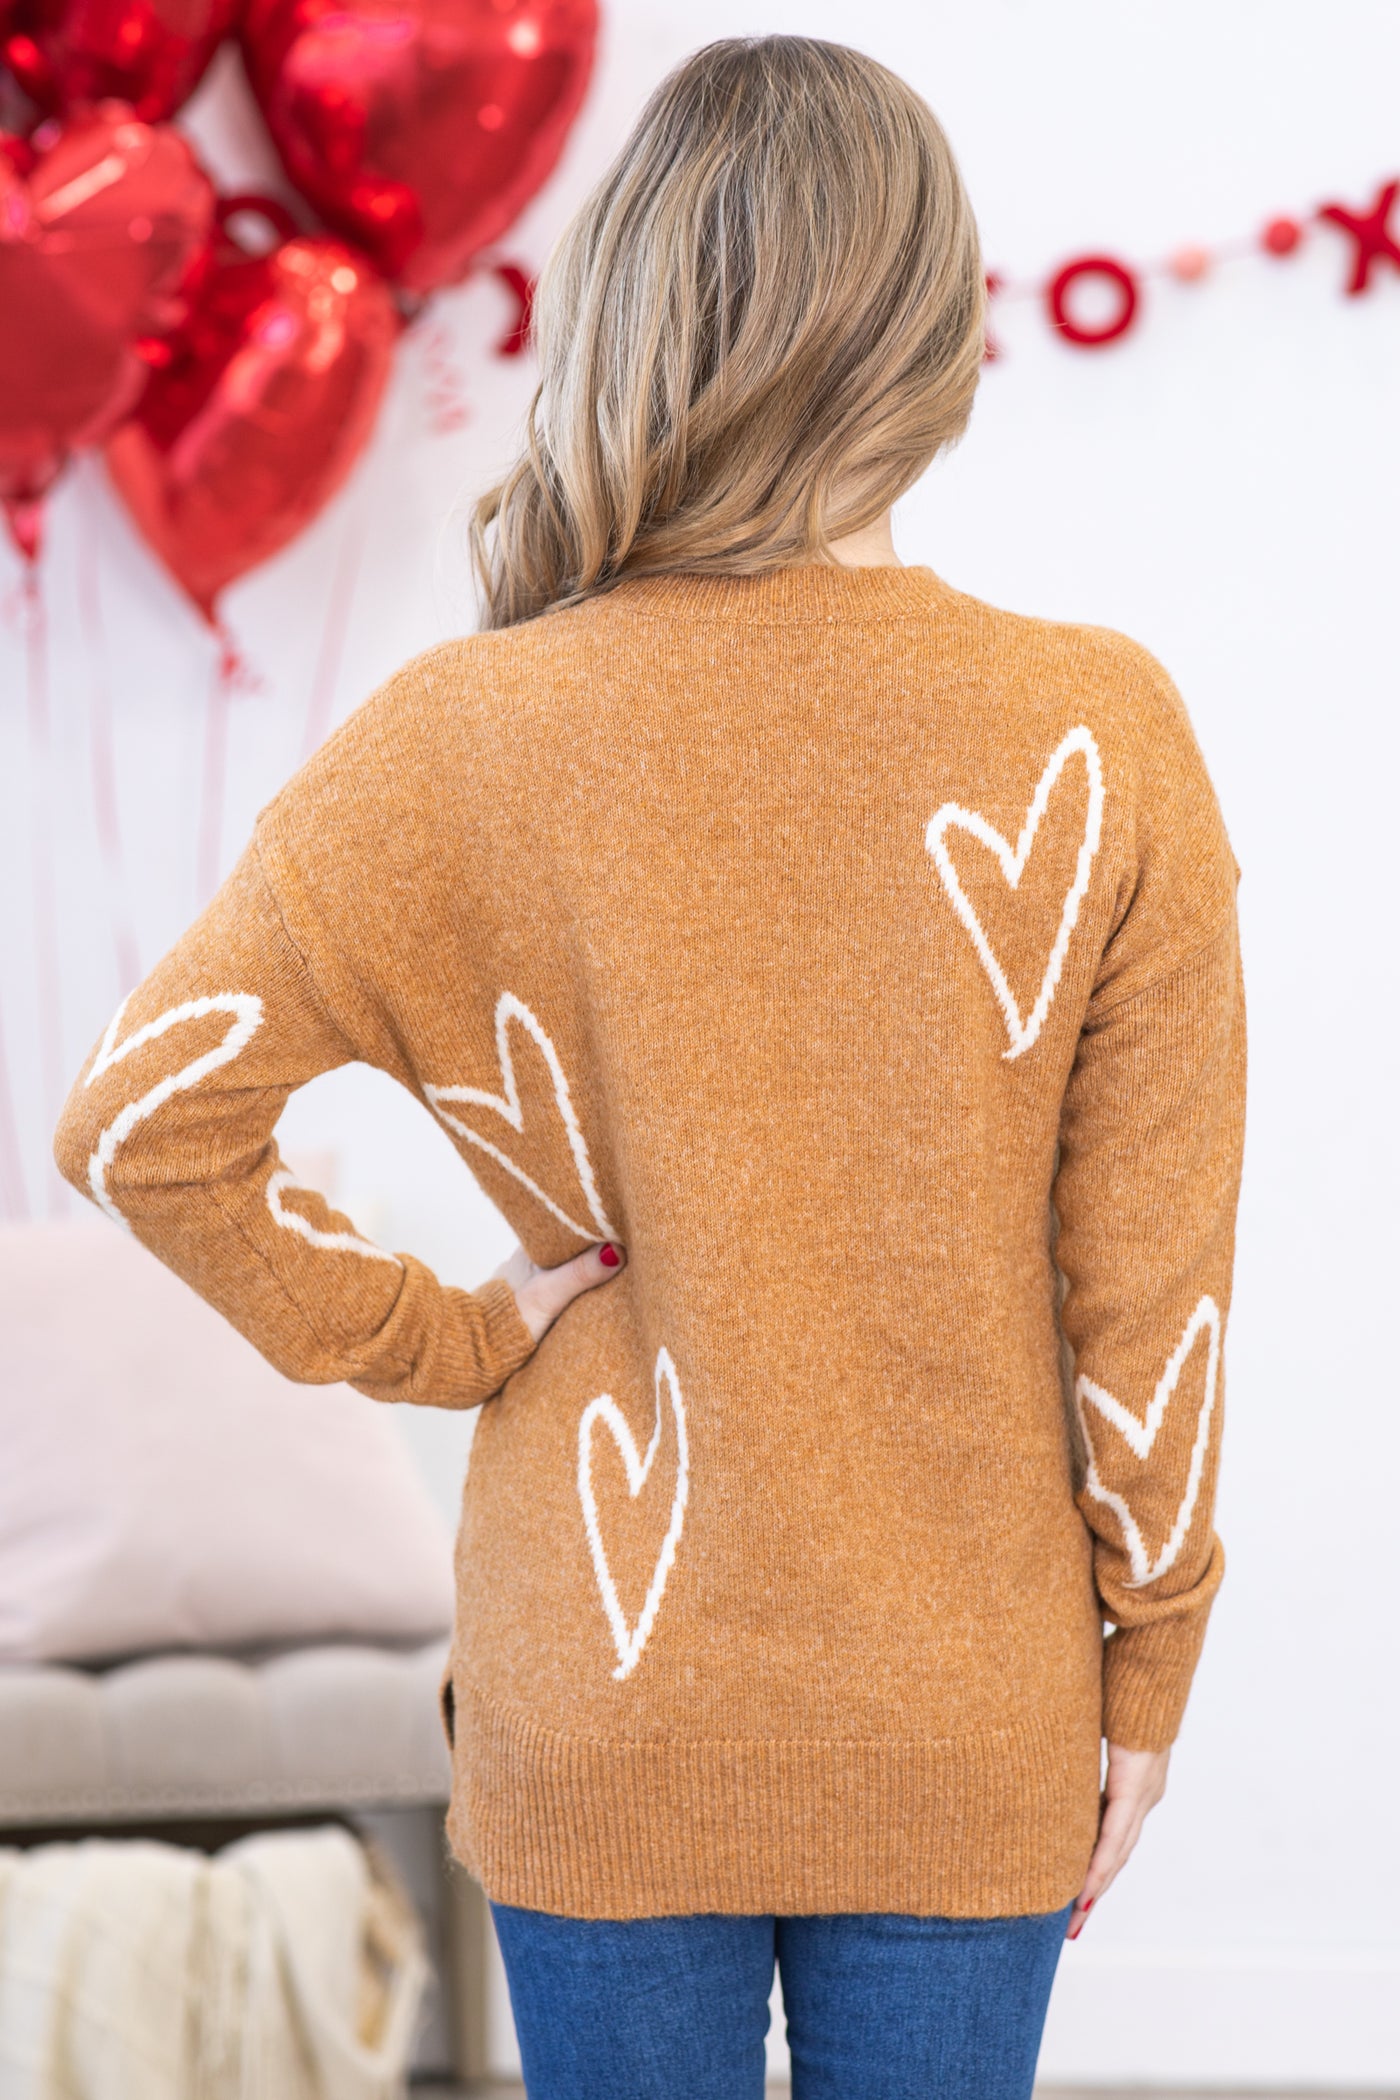 Cinnamon and White Scattered Hearts Sweater